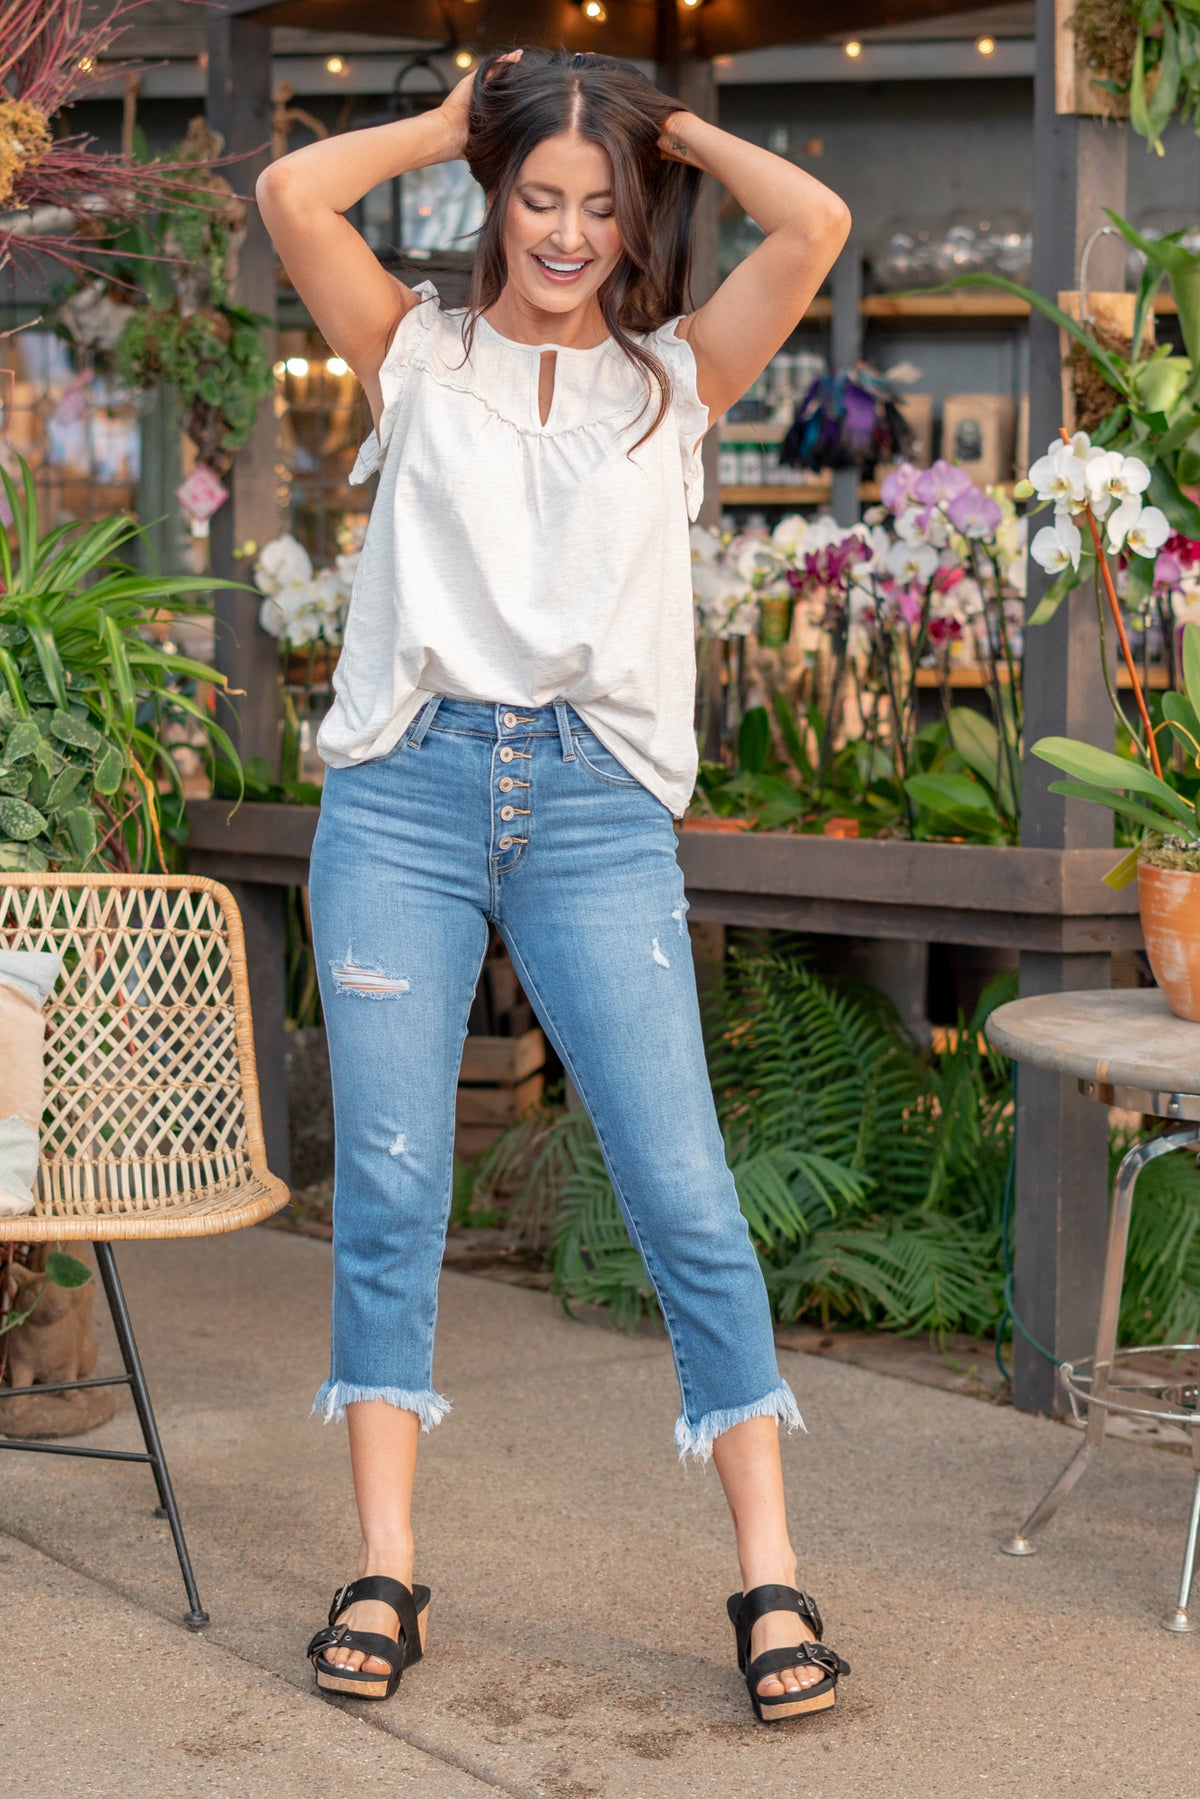 KanCan Jeans  With a high waist and straight fit, these will be your go-to jeans that will never go out of style. Color: Medium Blue  Cut: Cropped Straight Fit, 25" Inseam* Rise: High-Rise, 10.5" Front Rise* 93% COTTON, 5% POLYESTER, 2% SPANDEX Fly: Exposed Button Fly Style #: KC2560M